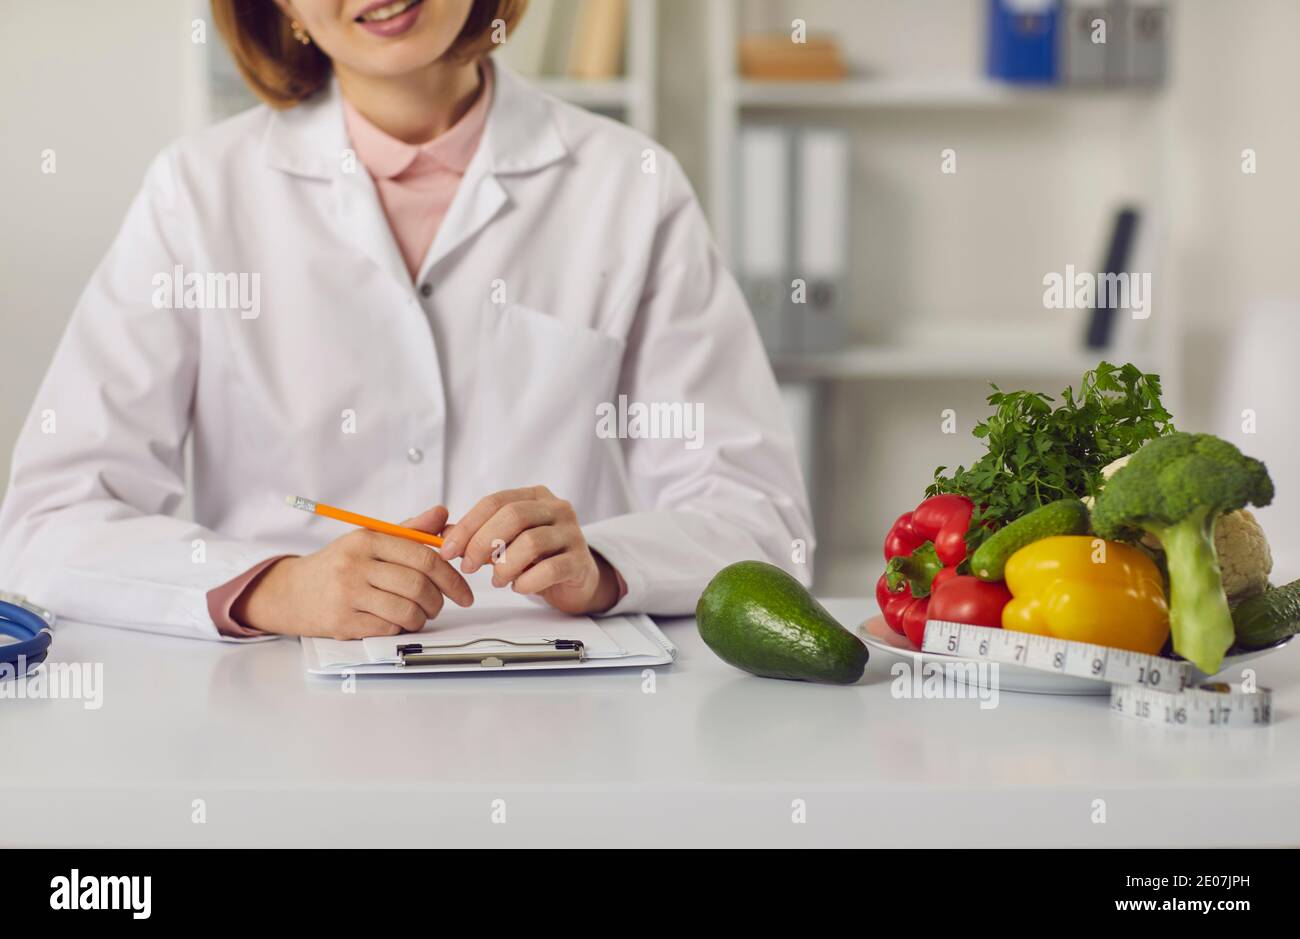 Dietitian sitting at table with fresh fruit, vegetables and individual diet plan Stock Photo